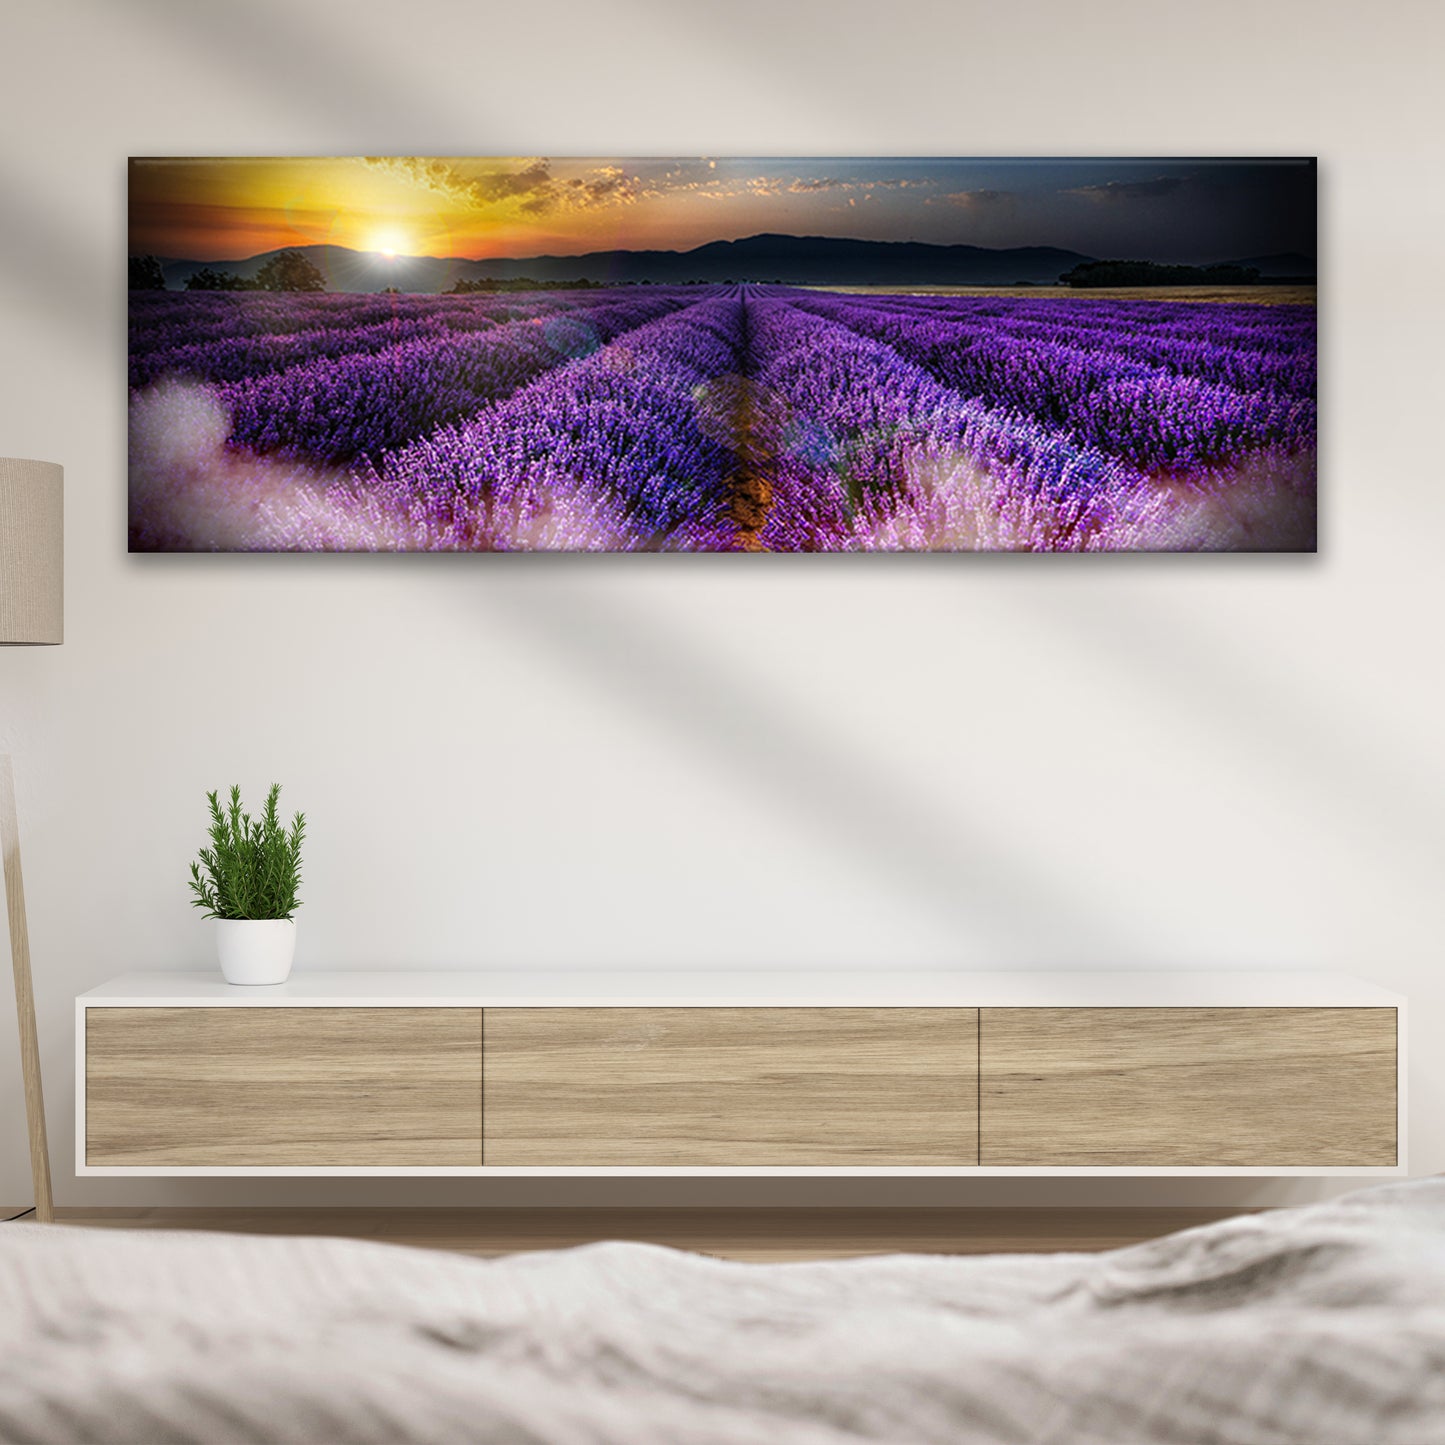 Sunset Over Lavender Field Canvas Wall Art - Image by Tailored Canvases